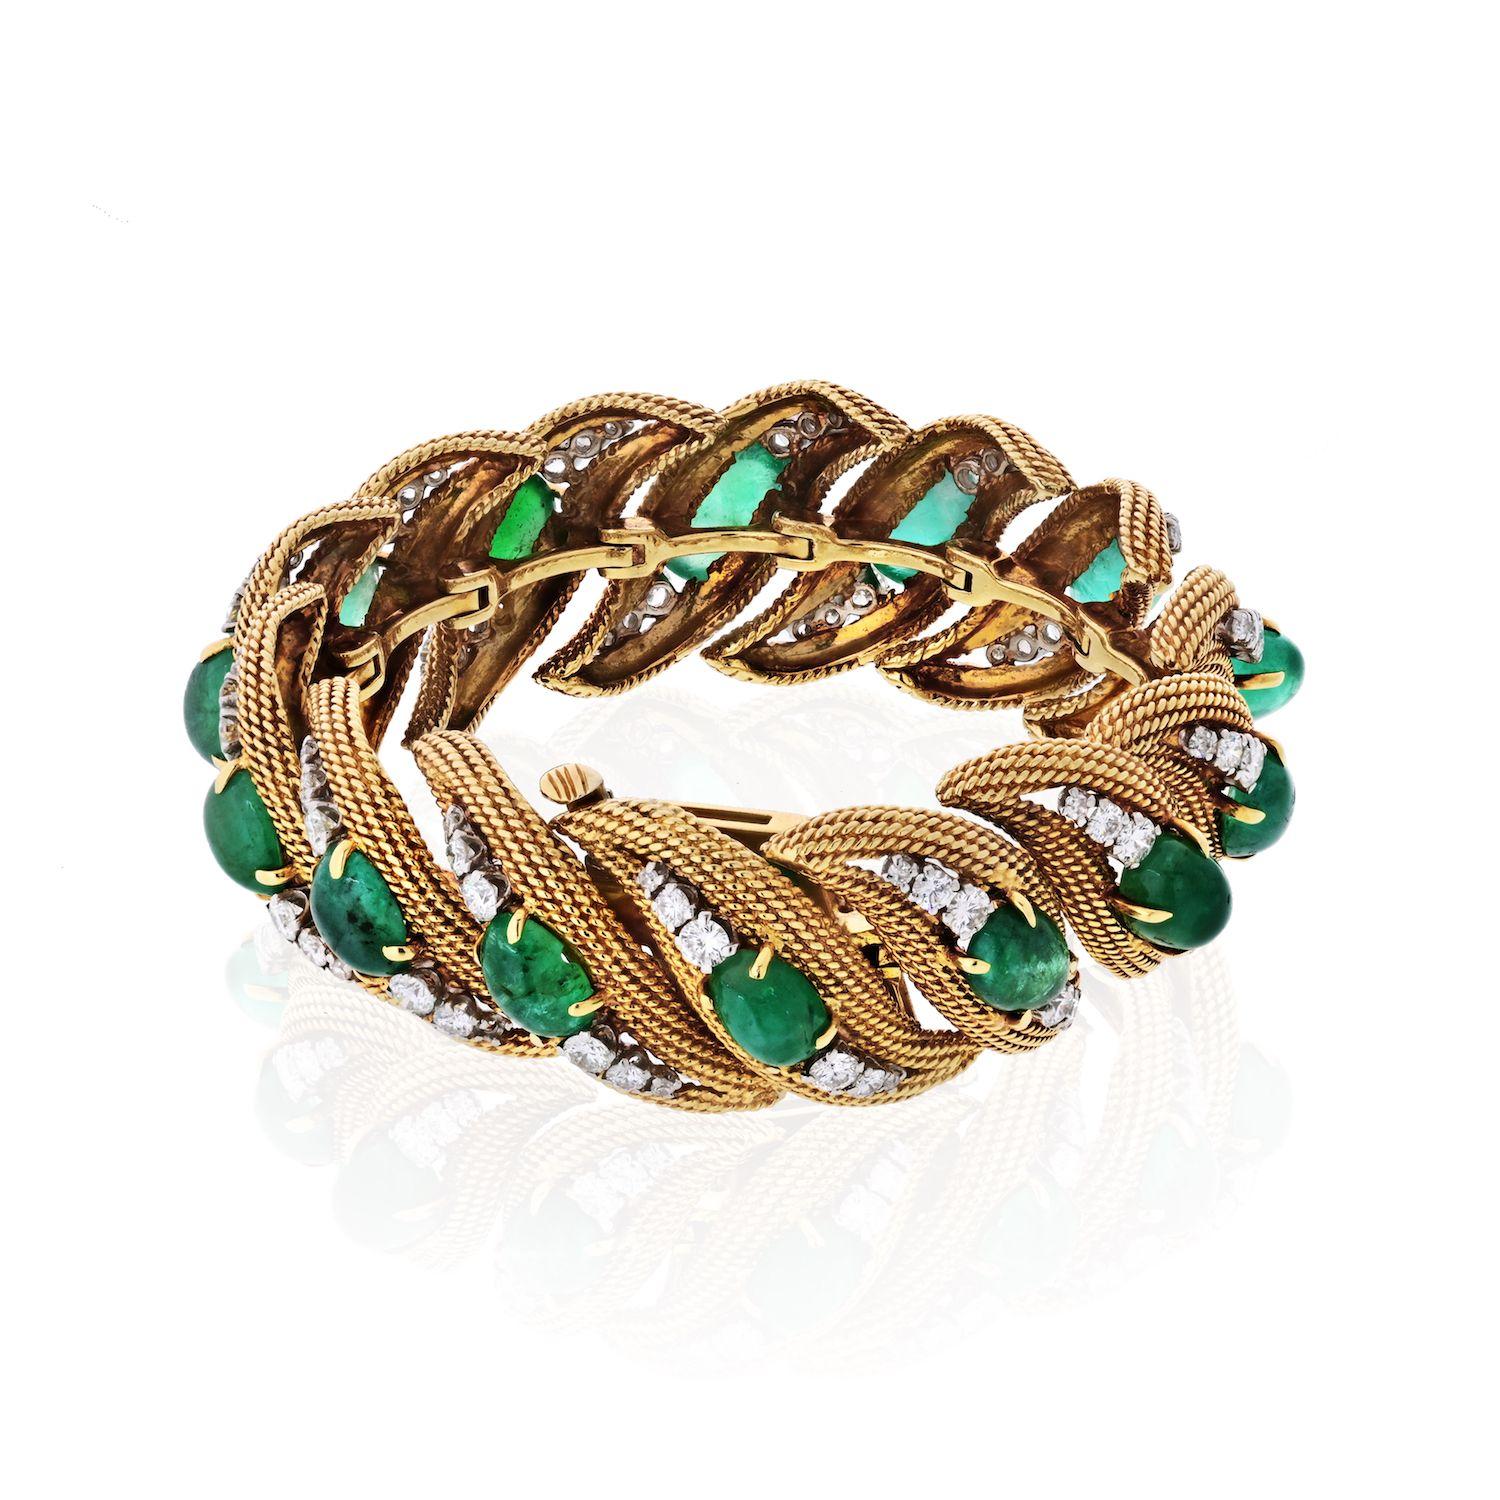 Vintage bracelet by David Webb crafted in 18K Yellow Gold and Platinum, mounted with 14 lovely green cabochon emeralds and round cut diamonds. 
Bracelet Width: 0.8 inches 
Inside Circumference 6.5 inches